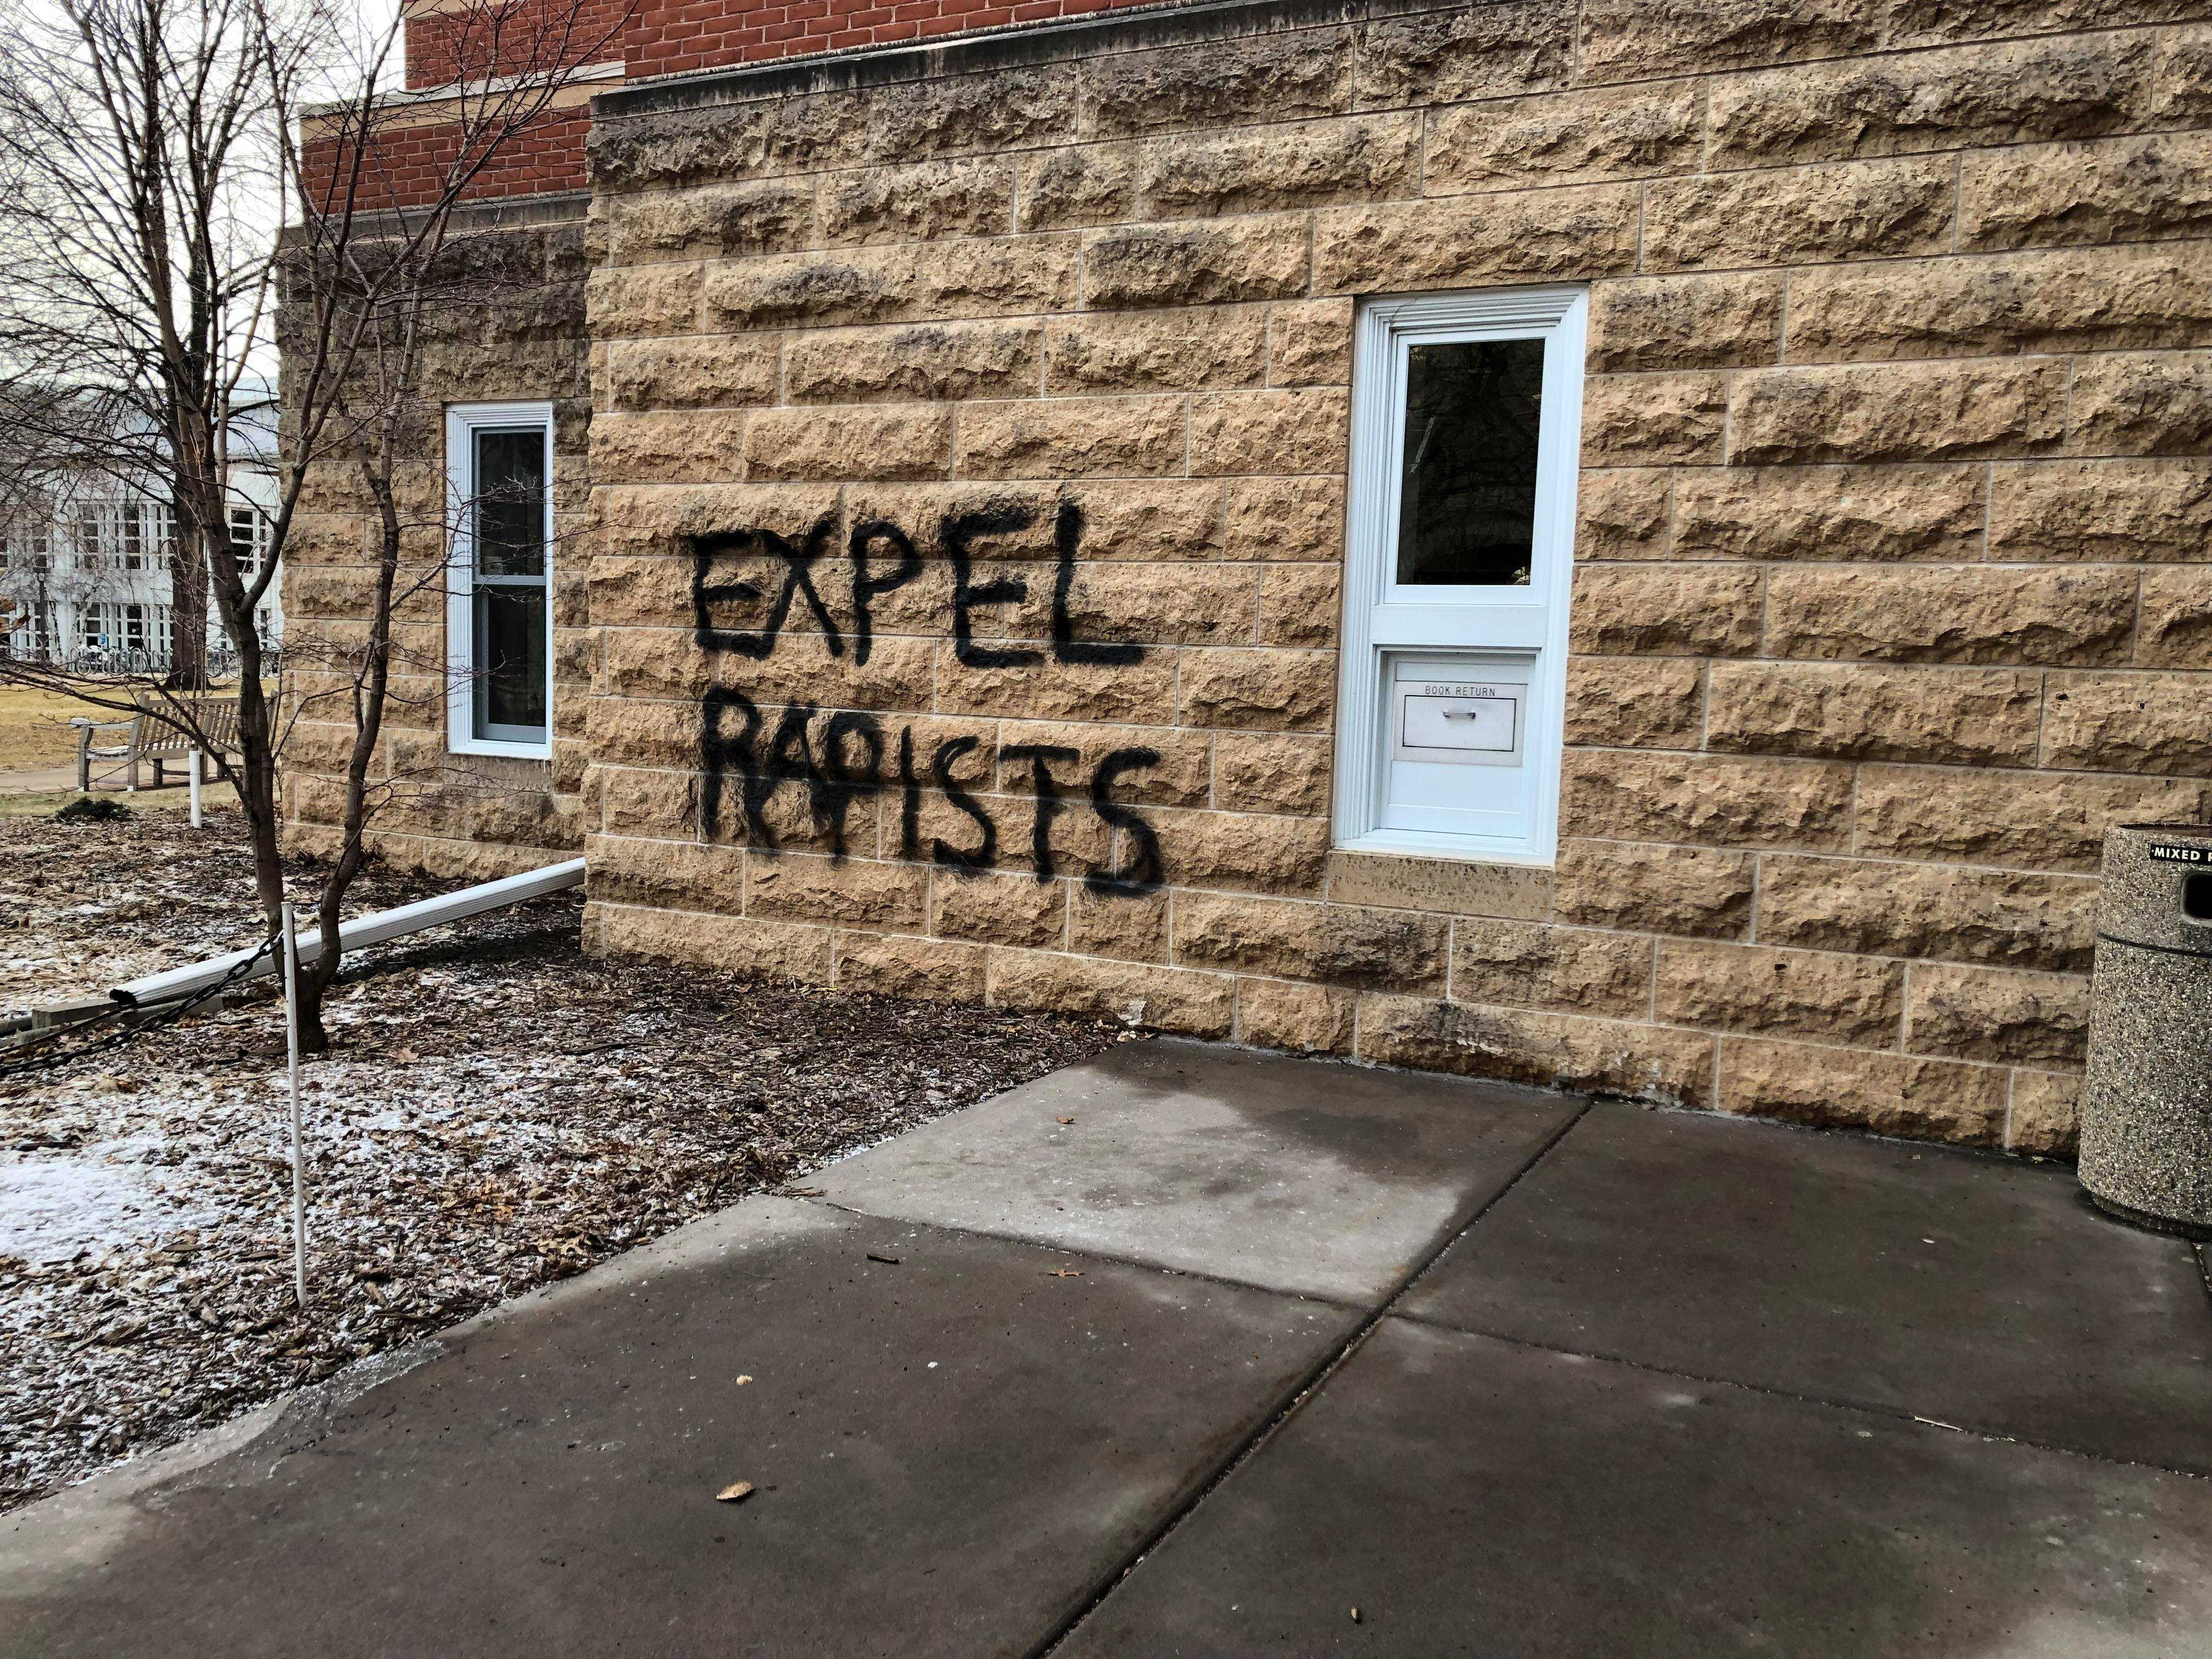 Sexual Violence Related Graffiti Found On Campus Buildings The